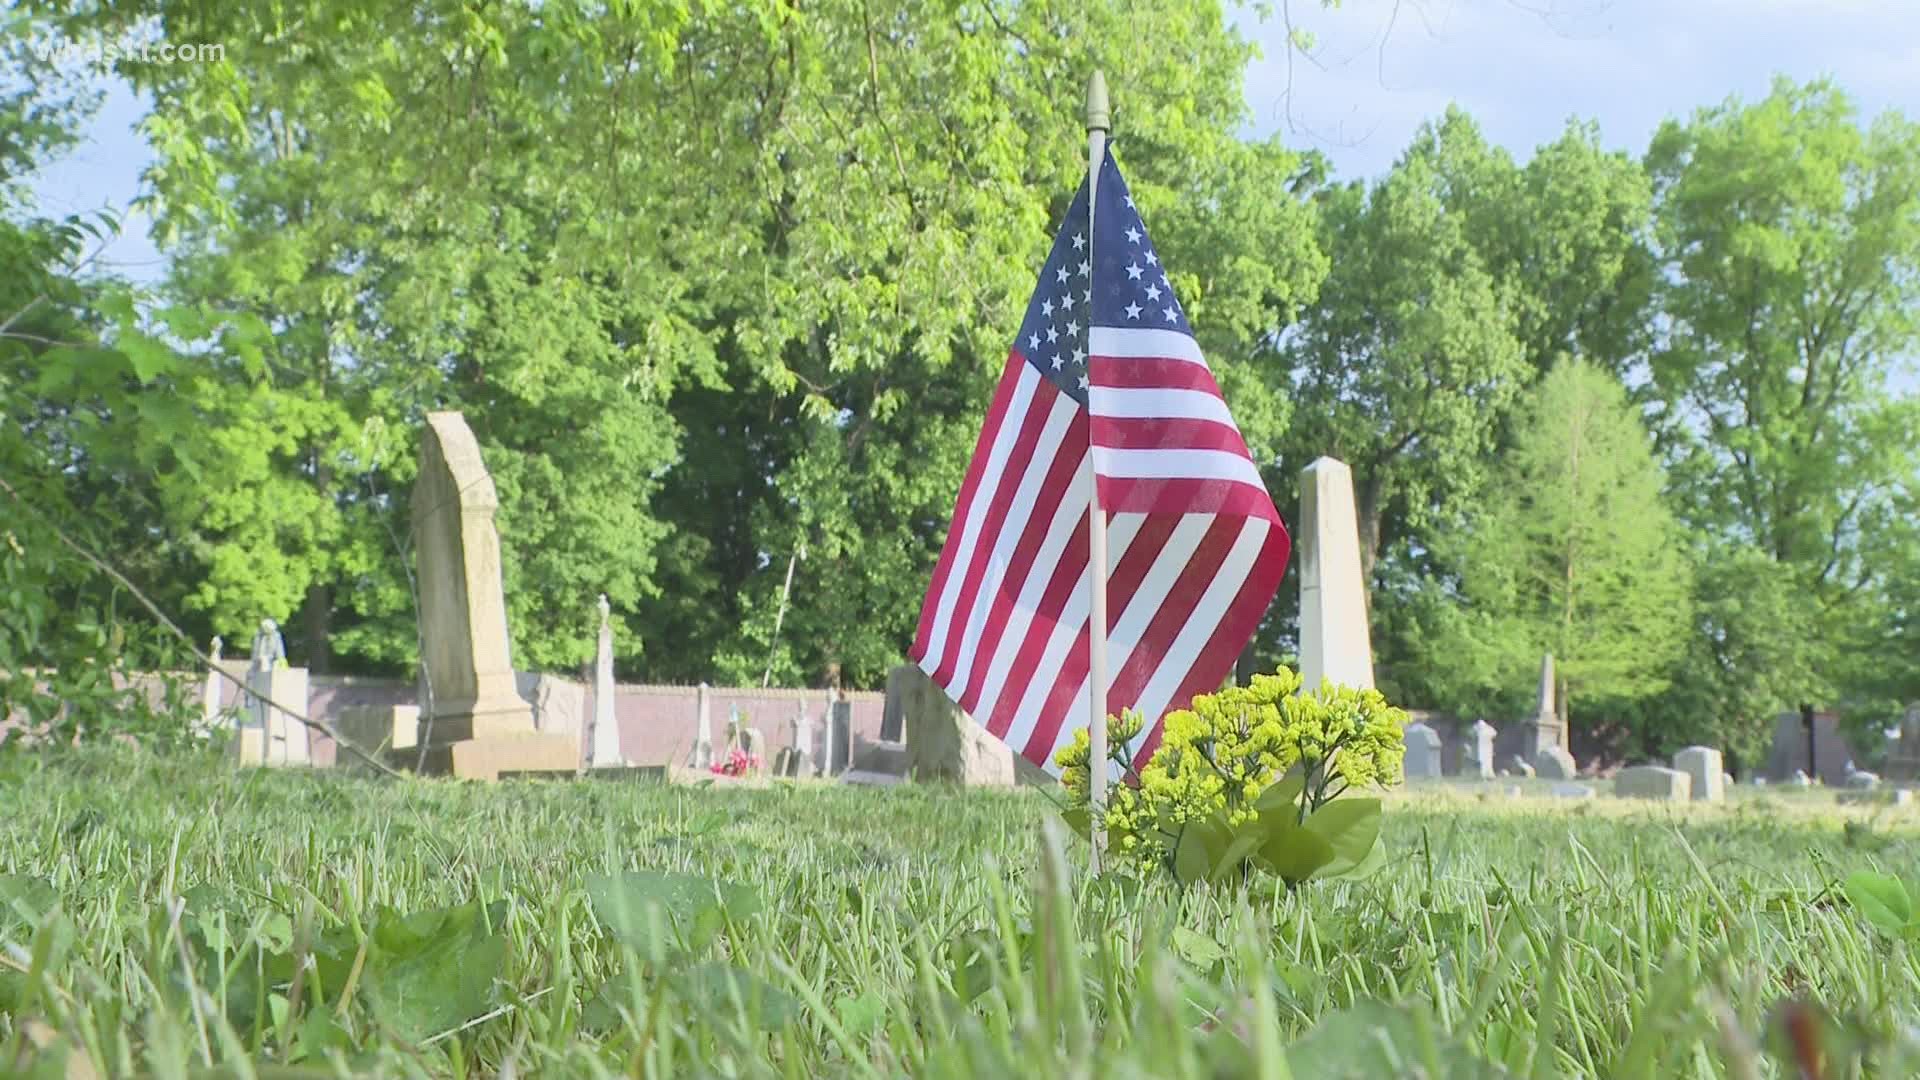 For an hour this afternoon, volunteers are going to place flags on the graves of fallen veterans. It’s a tradition that goes back about 5 years.